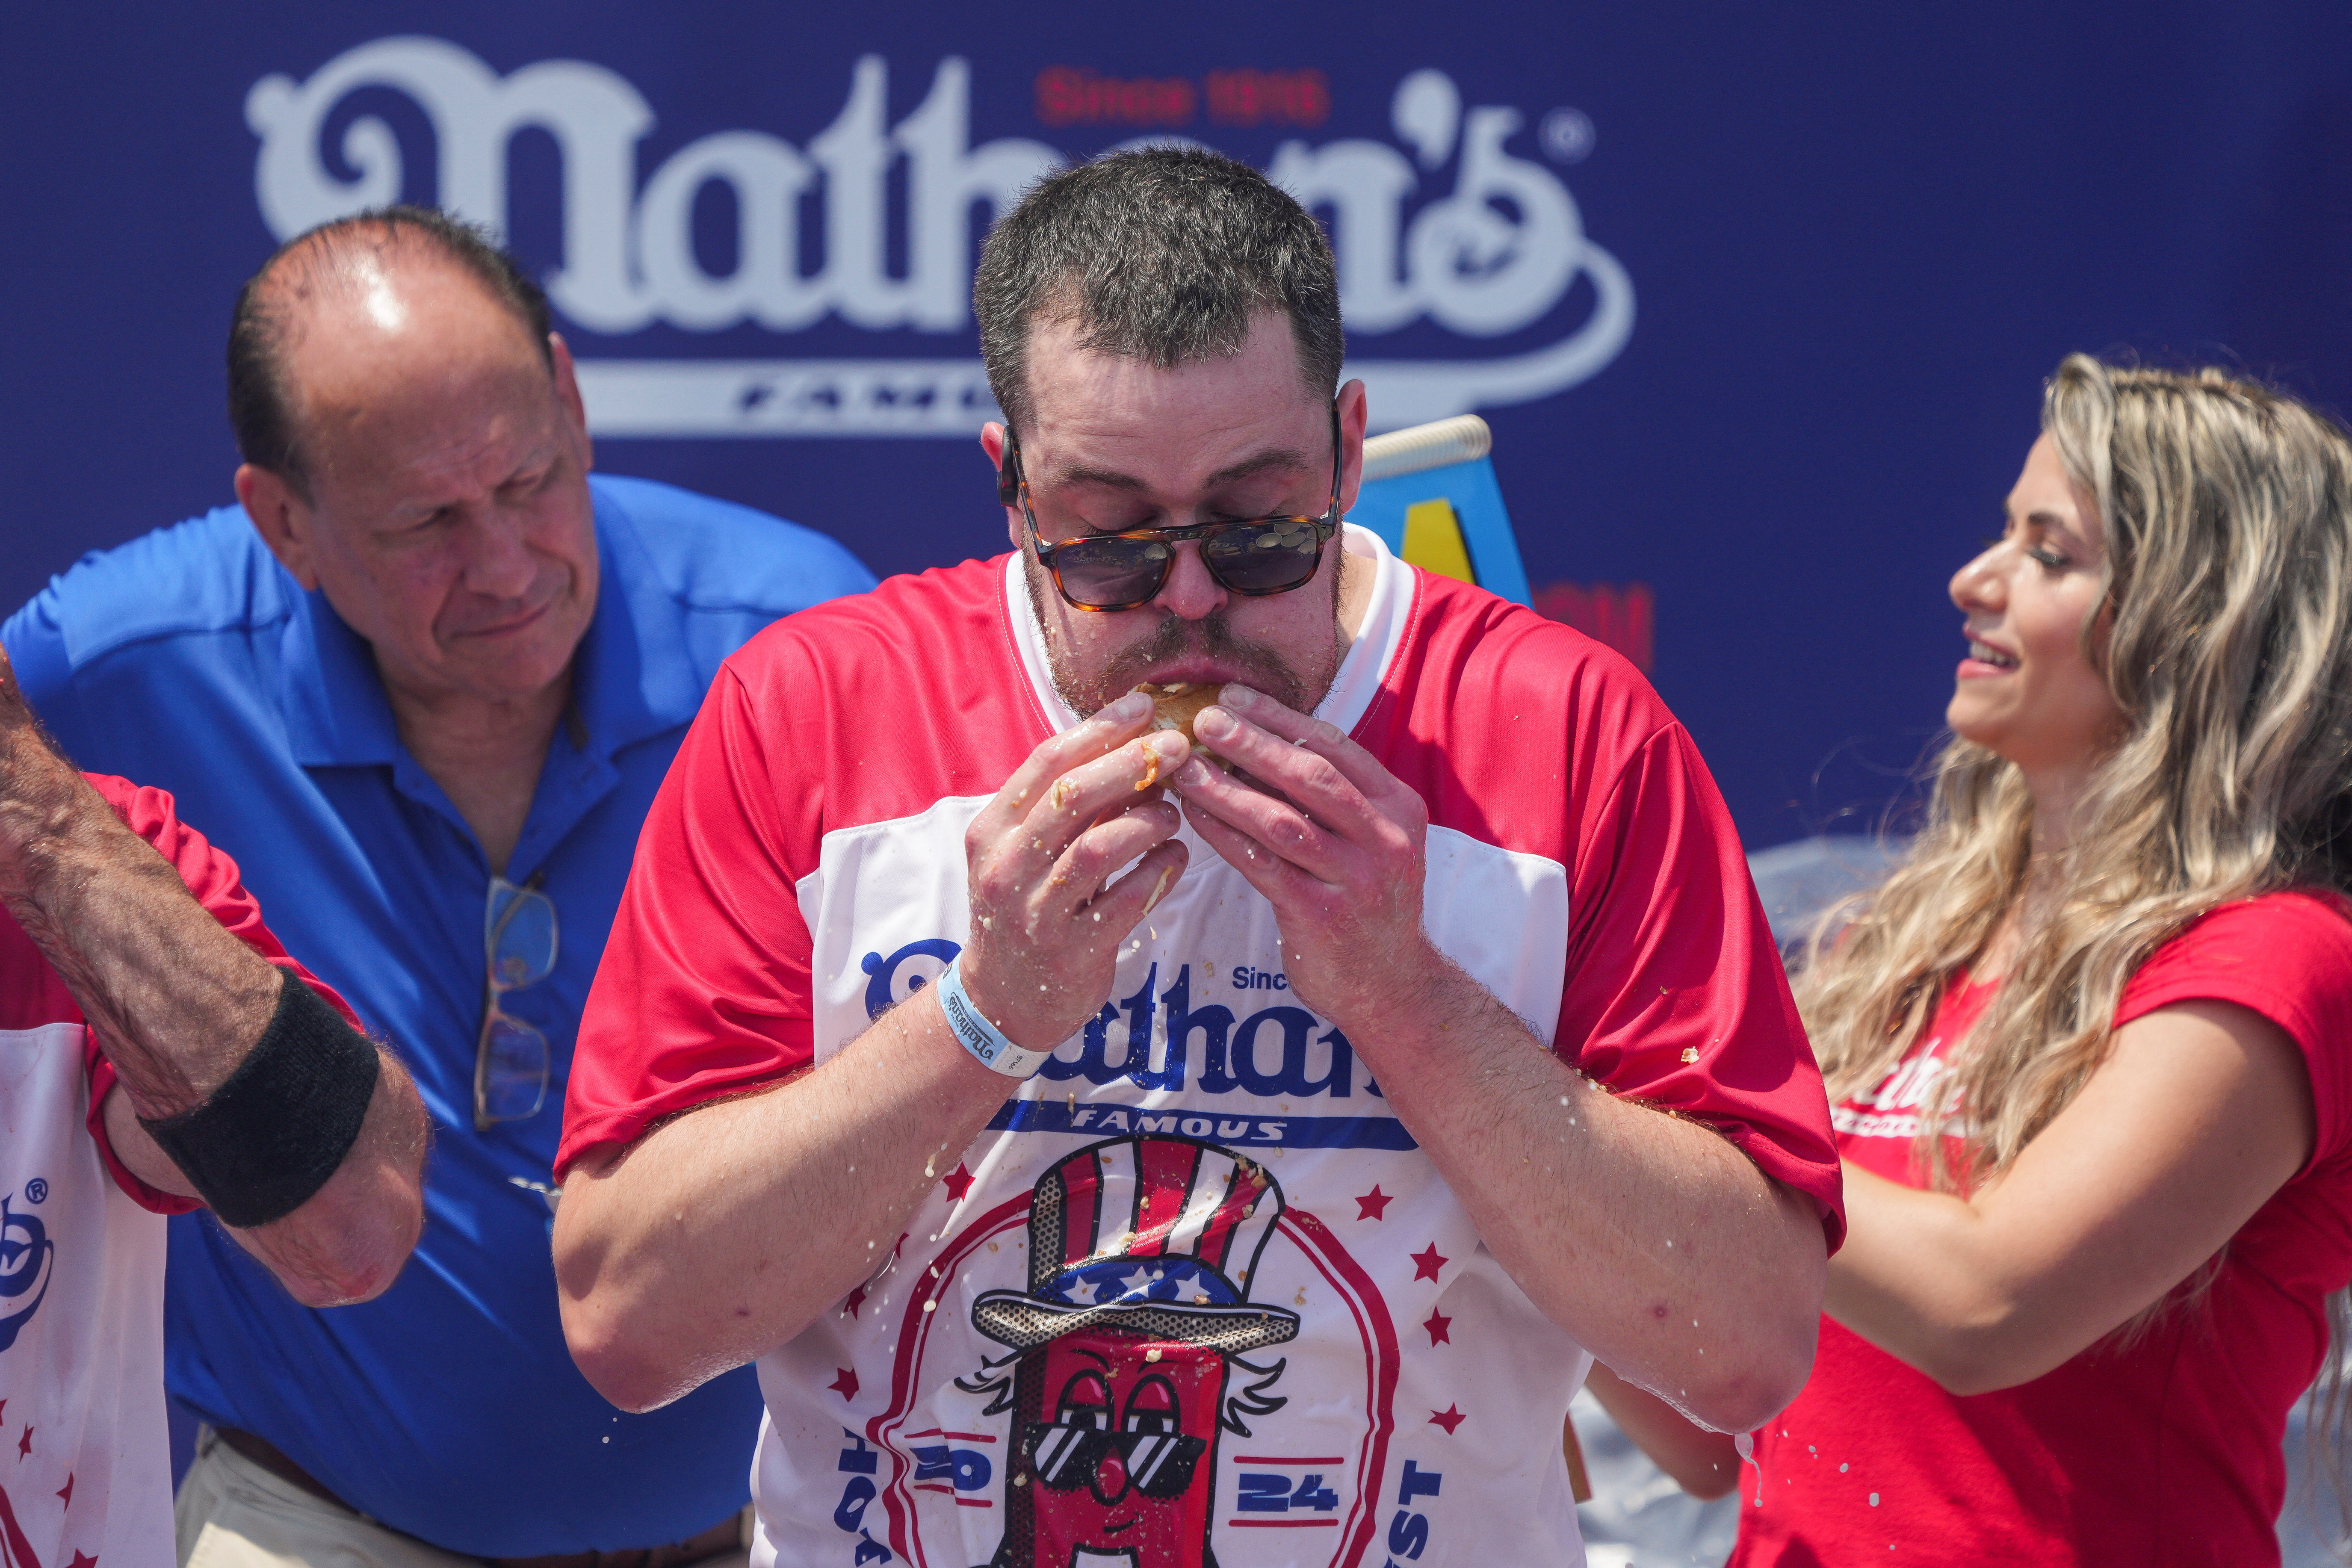 Competitive eaters vie for Nathan's hot dog eating contest victory